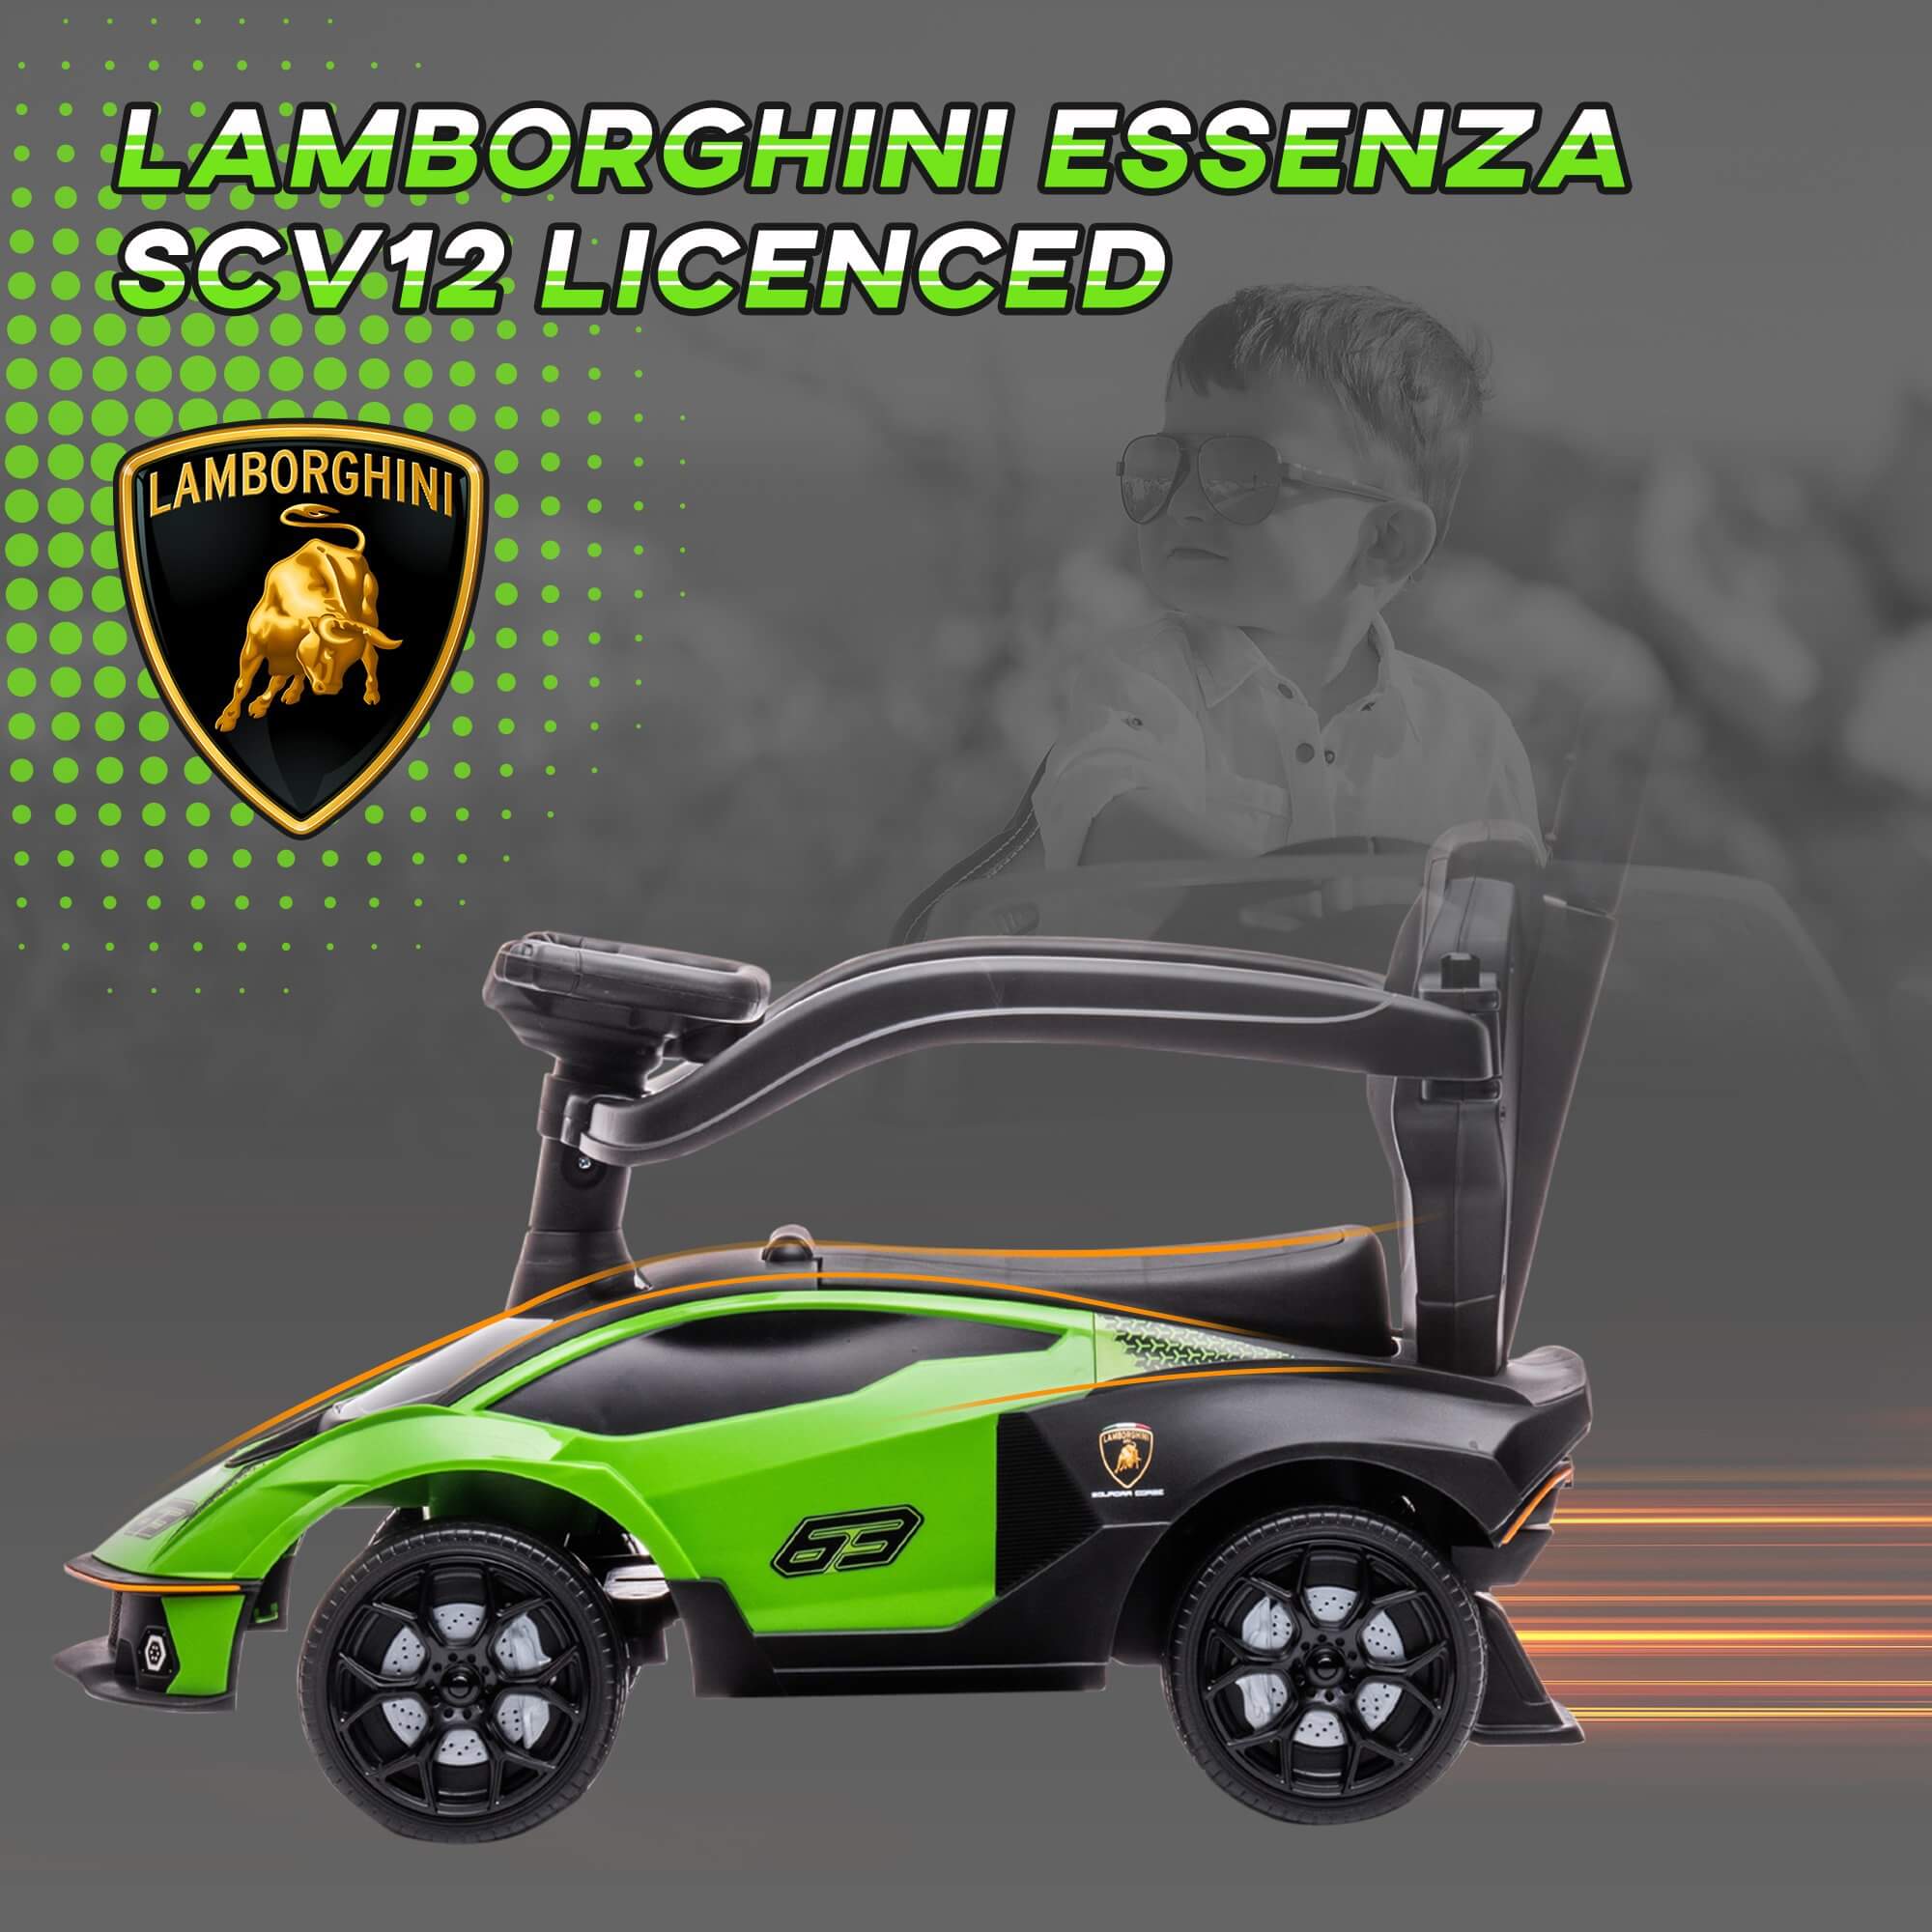 Megastar Ride on 2-IN-1 Licensed Lamborghini Signature  Push-Along Stroller with Horn Engine Sound and Steering Wheel with Parental Handle